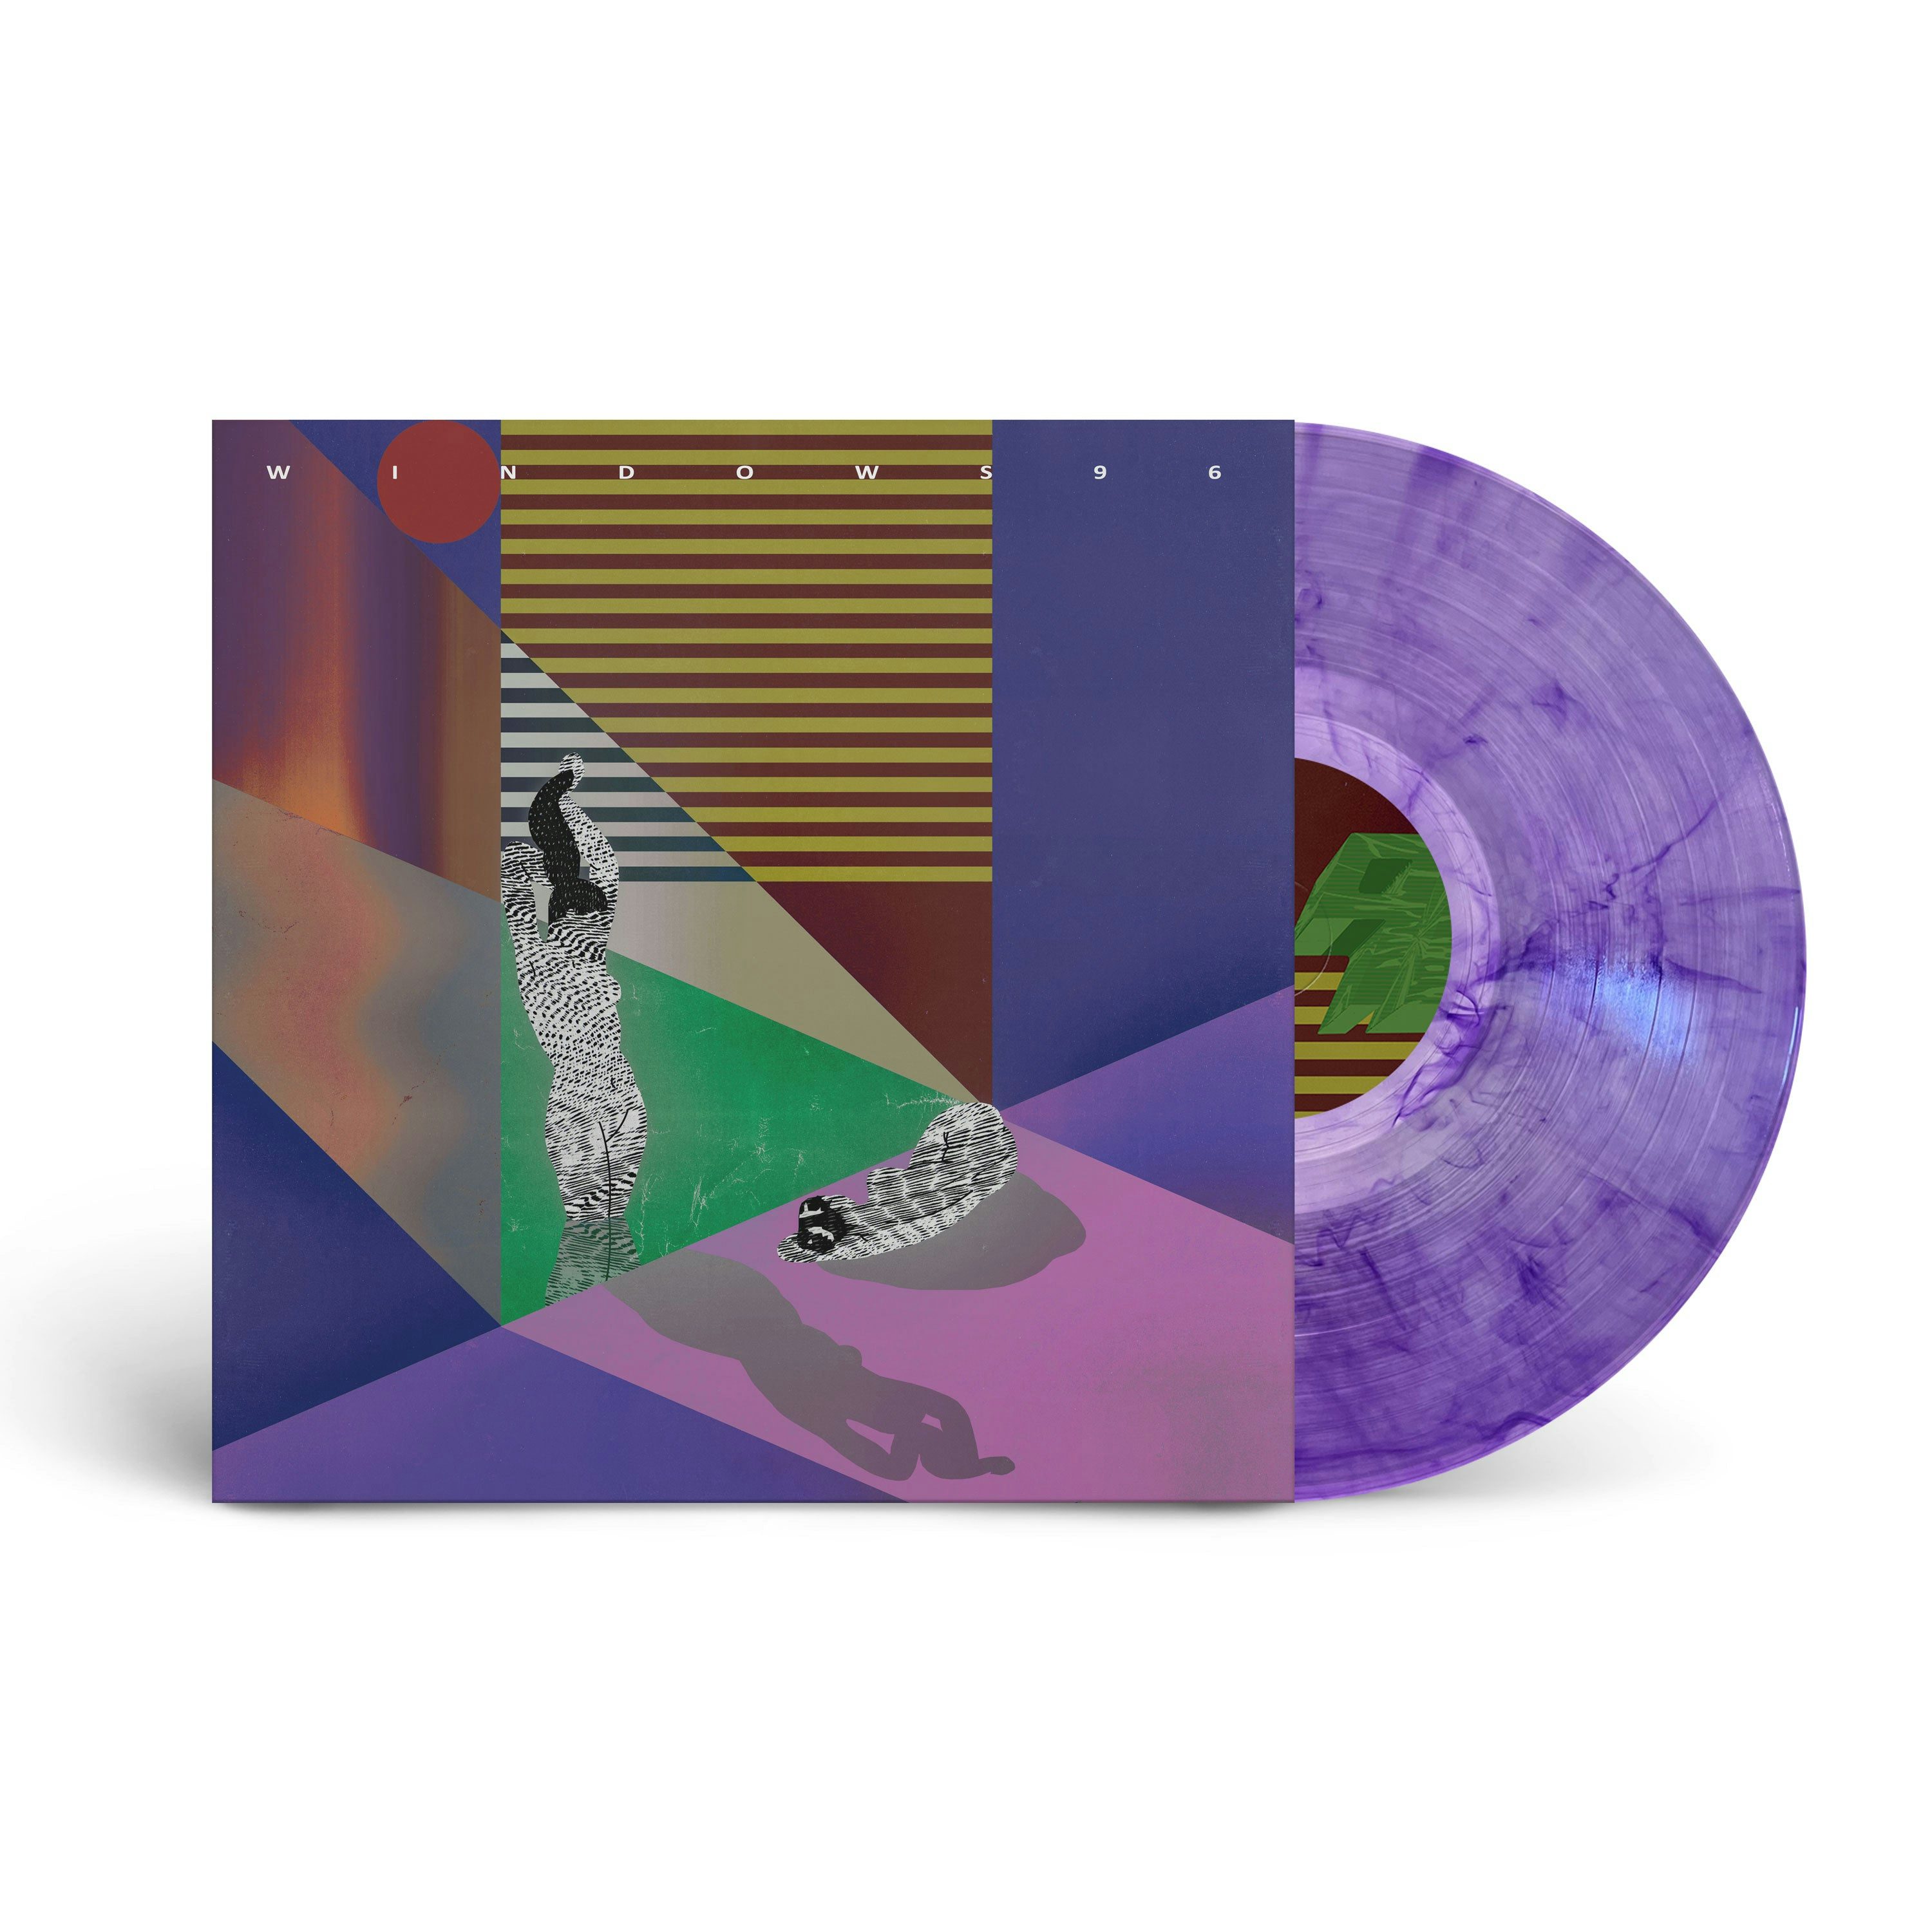 Windows 96 Enchanted Instrumentals and Whispers LP on Purple Marble Vinyl